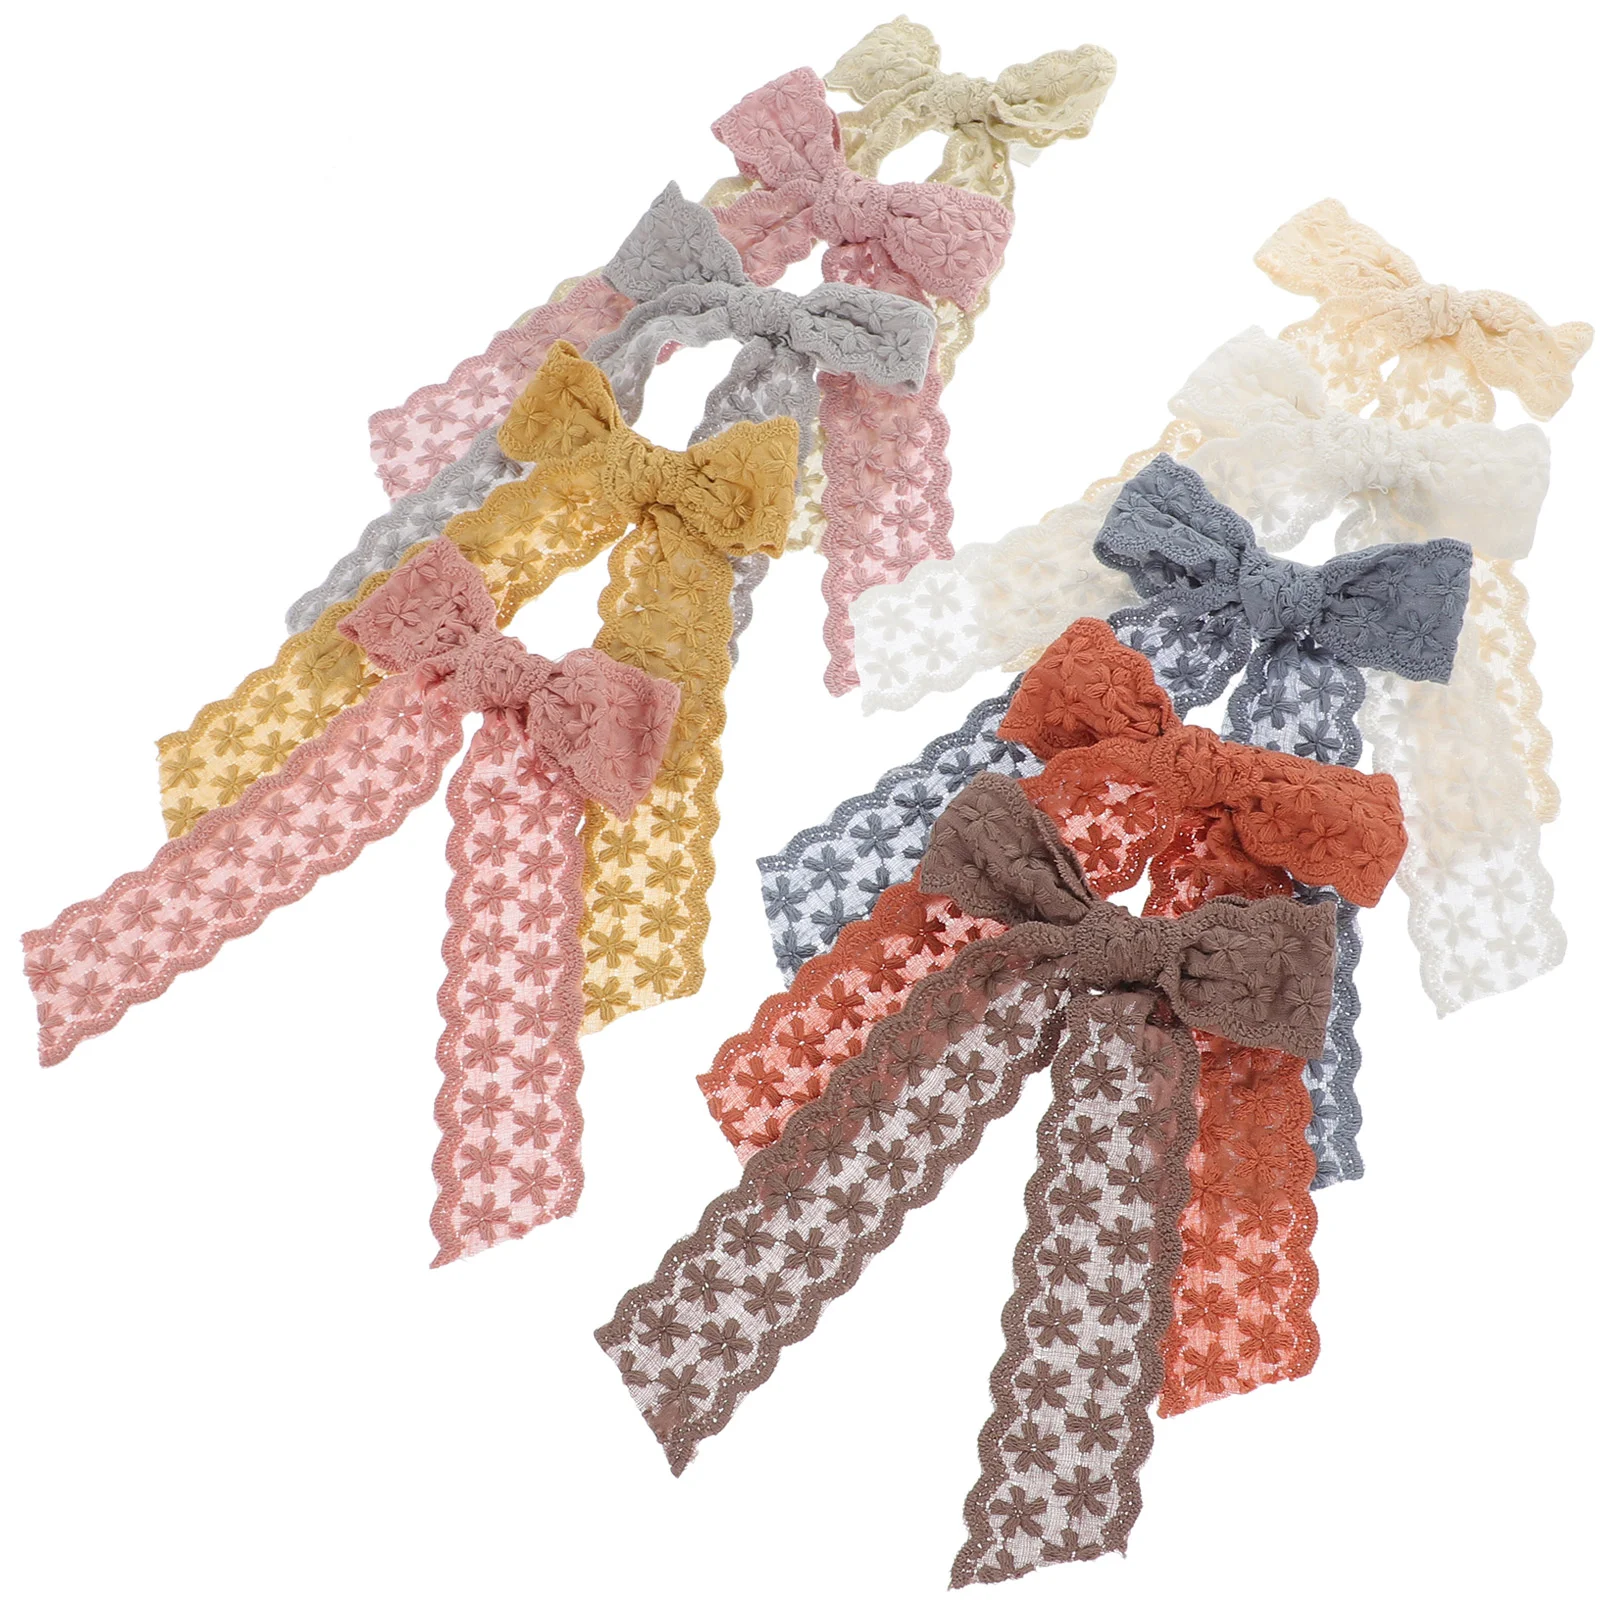 

10 Pcs Hair Barrettes Vintage Hairpin Girls Bow Clips Hairpins Bows Decorative Miss